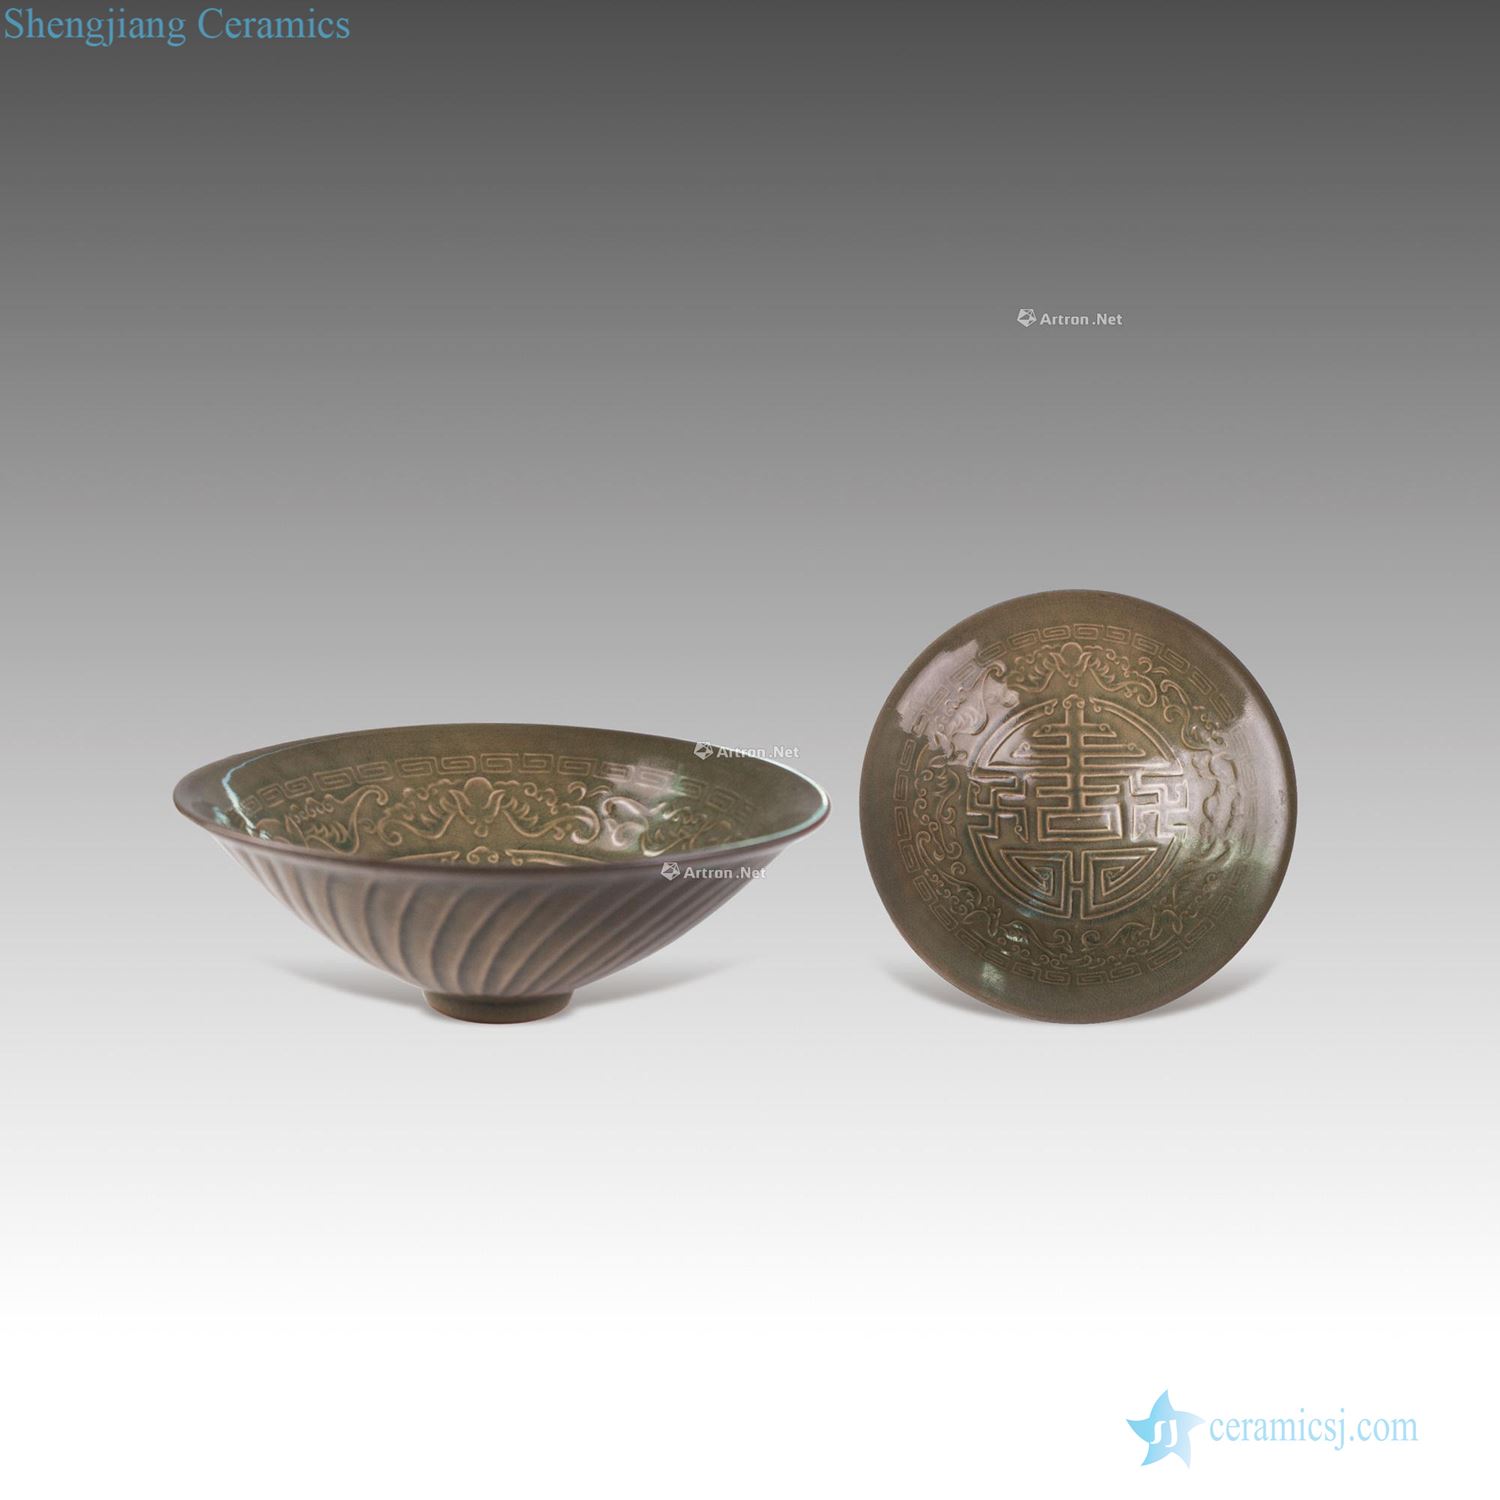 The song dynasty Yao state kiln live green-splashed bowls